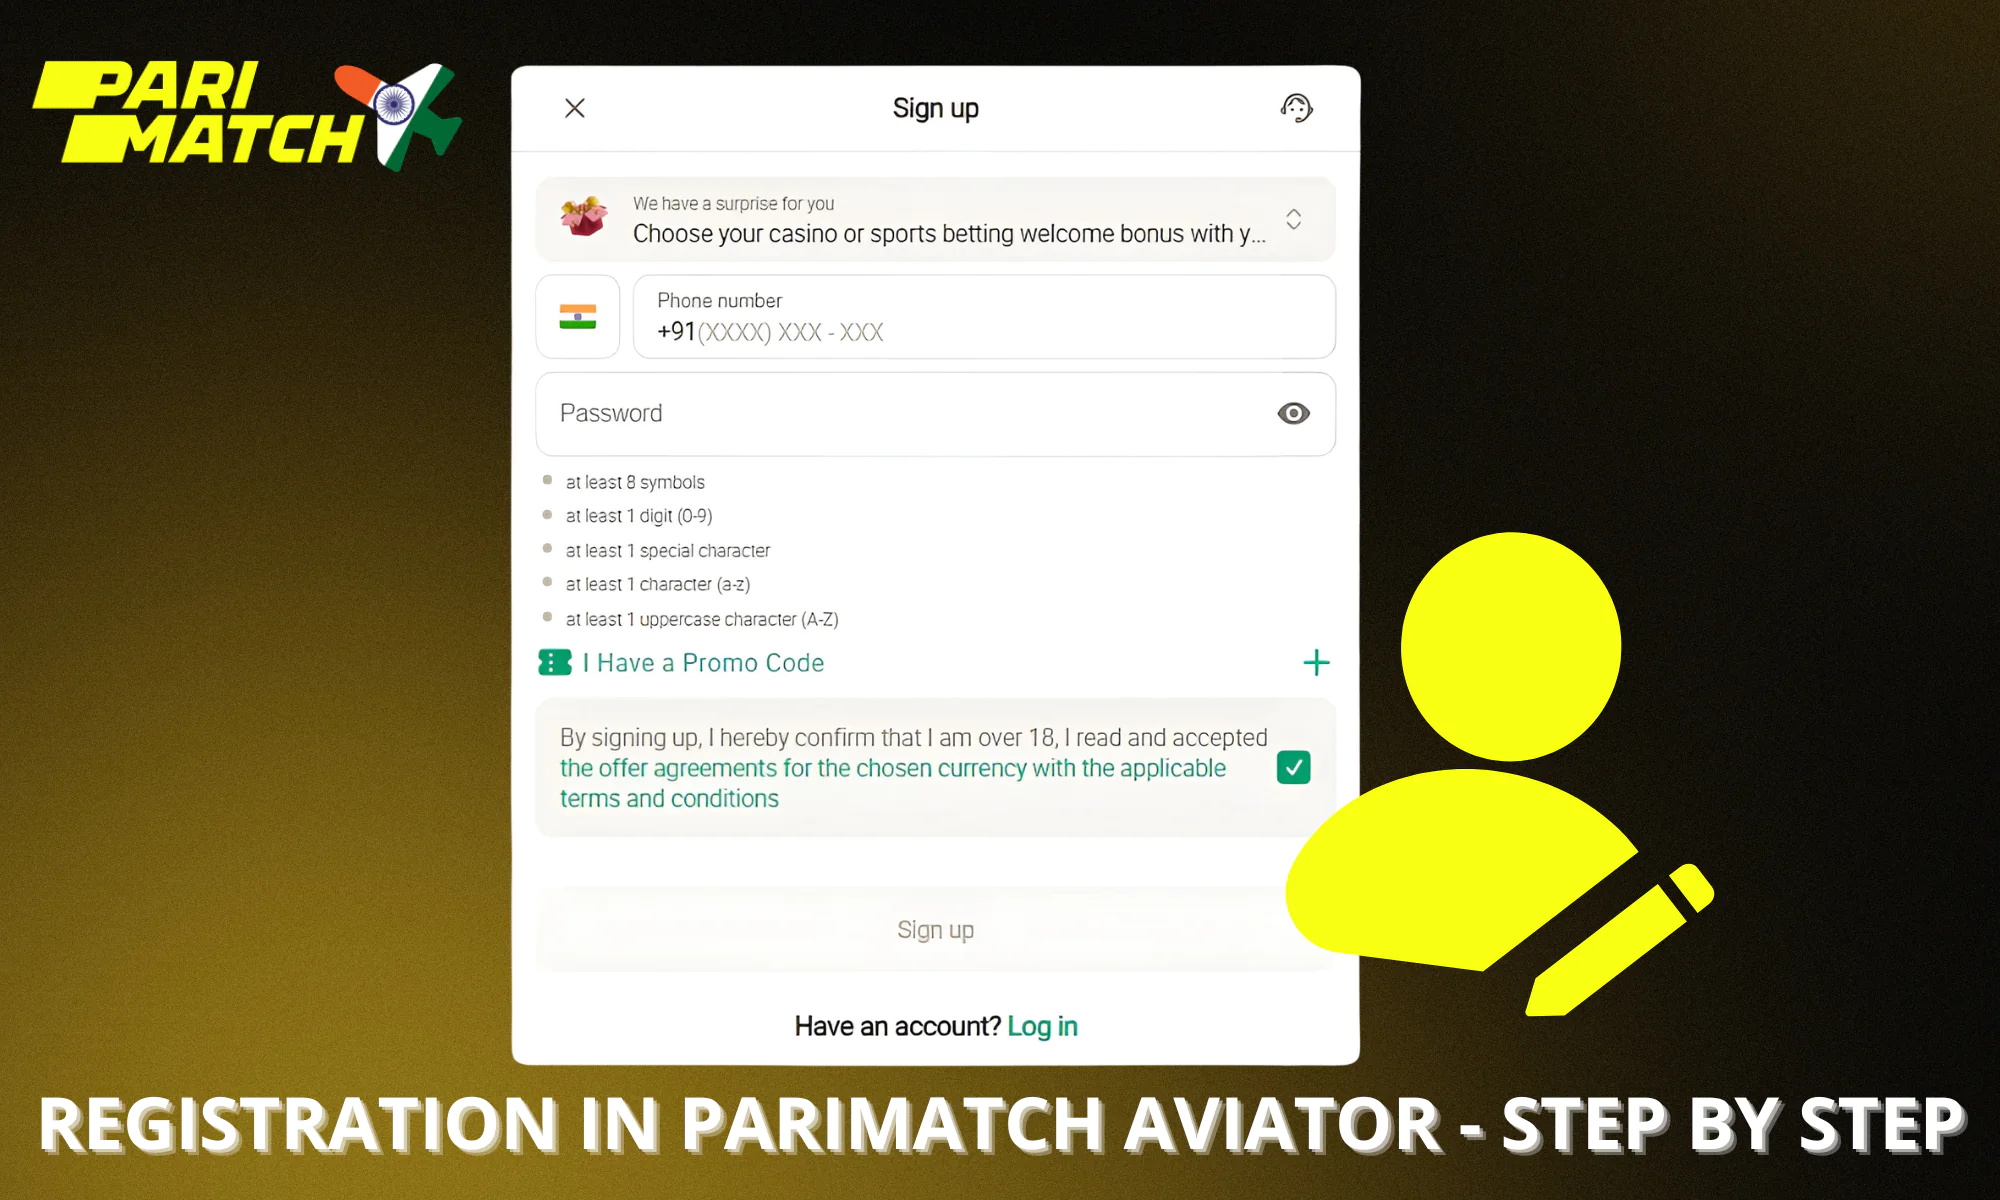 Step-by-step instructions for registering an account with Parimatch Aviator